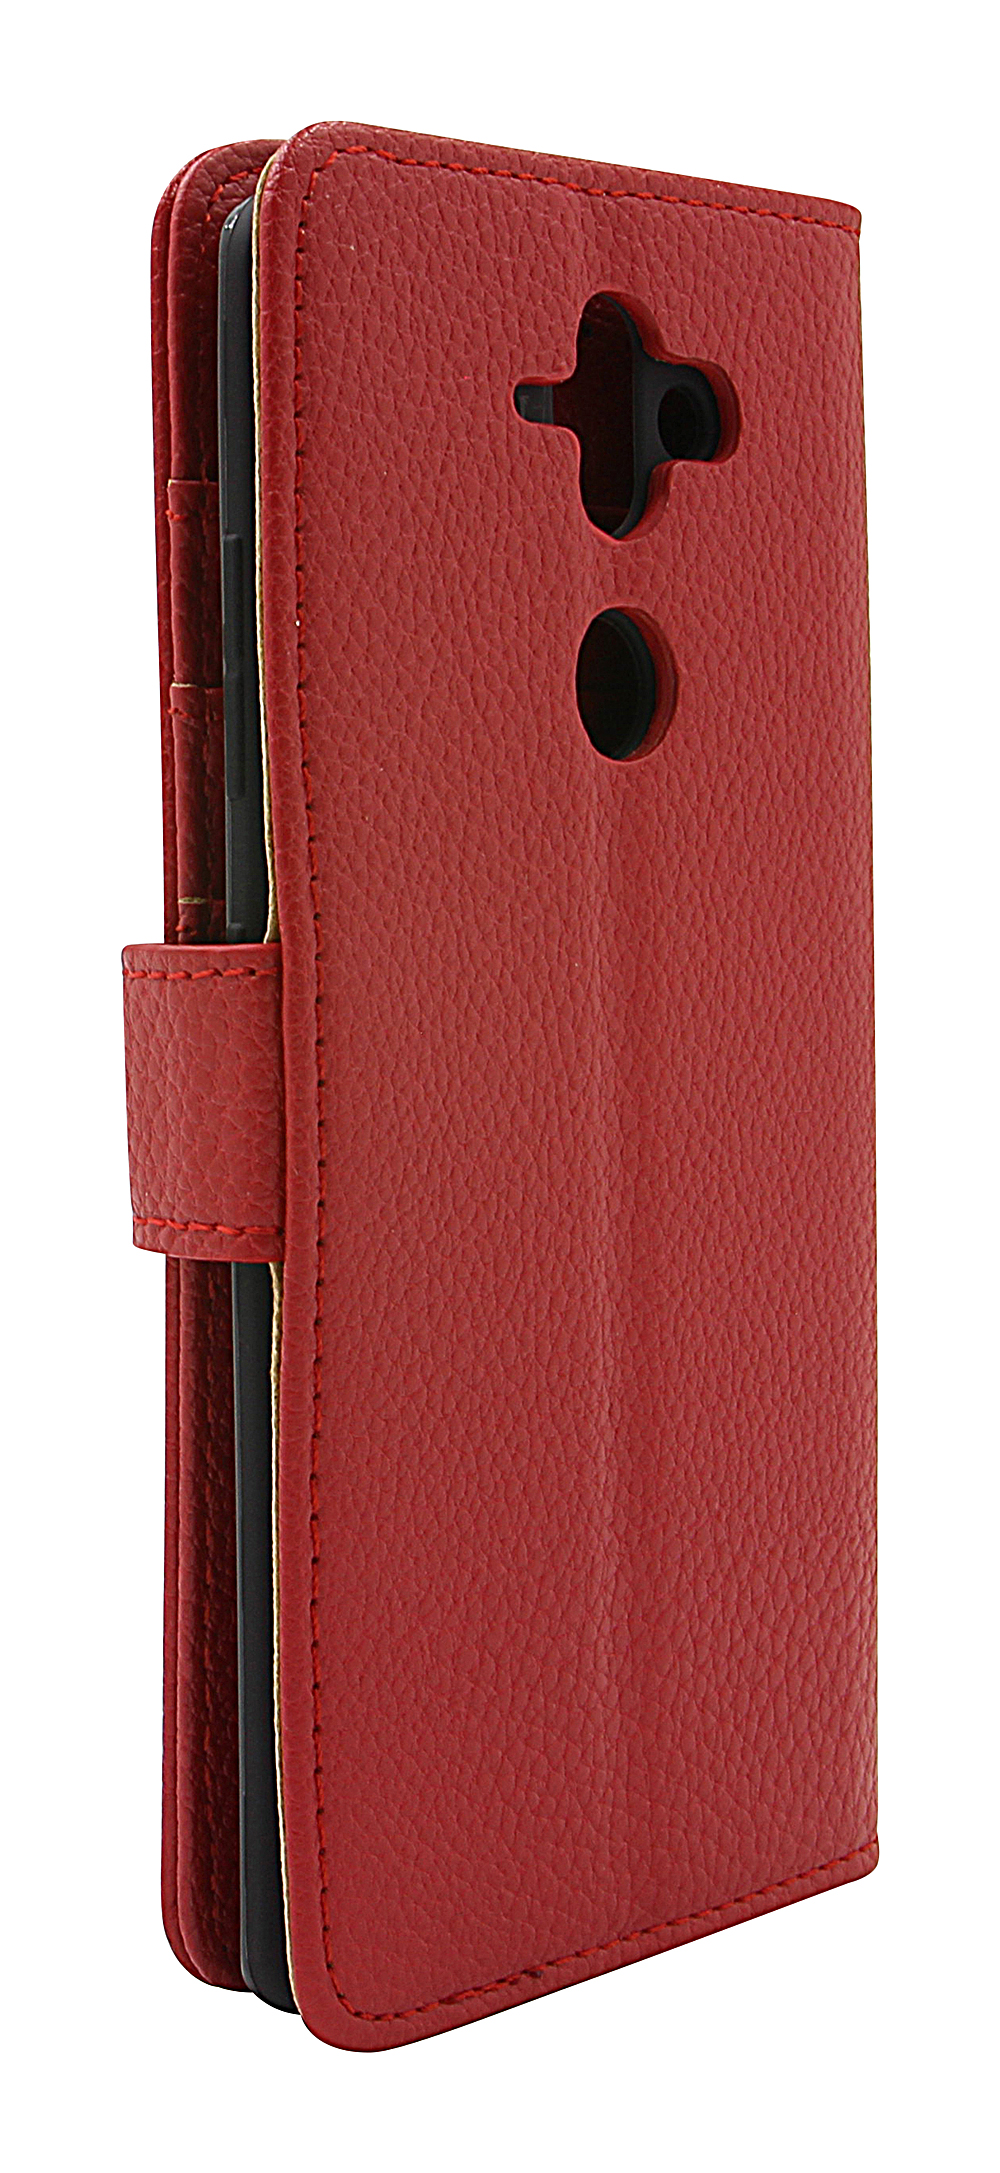 New Standcase Wallet Nokia 8 Sirocco